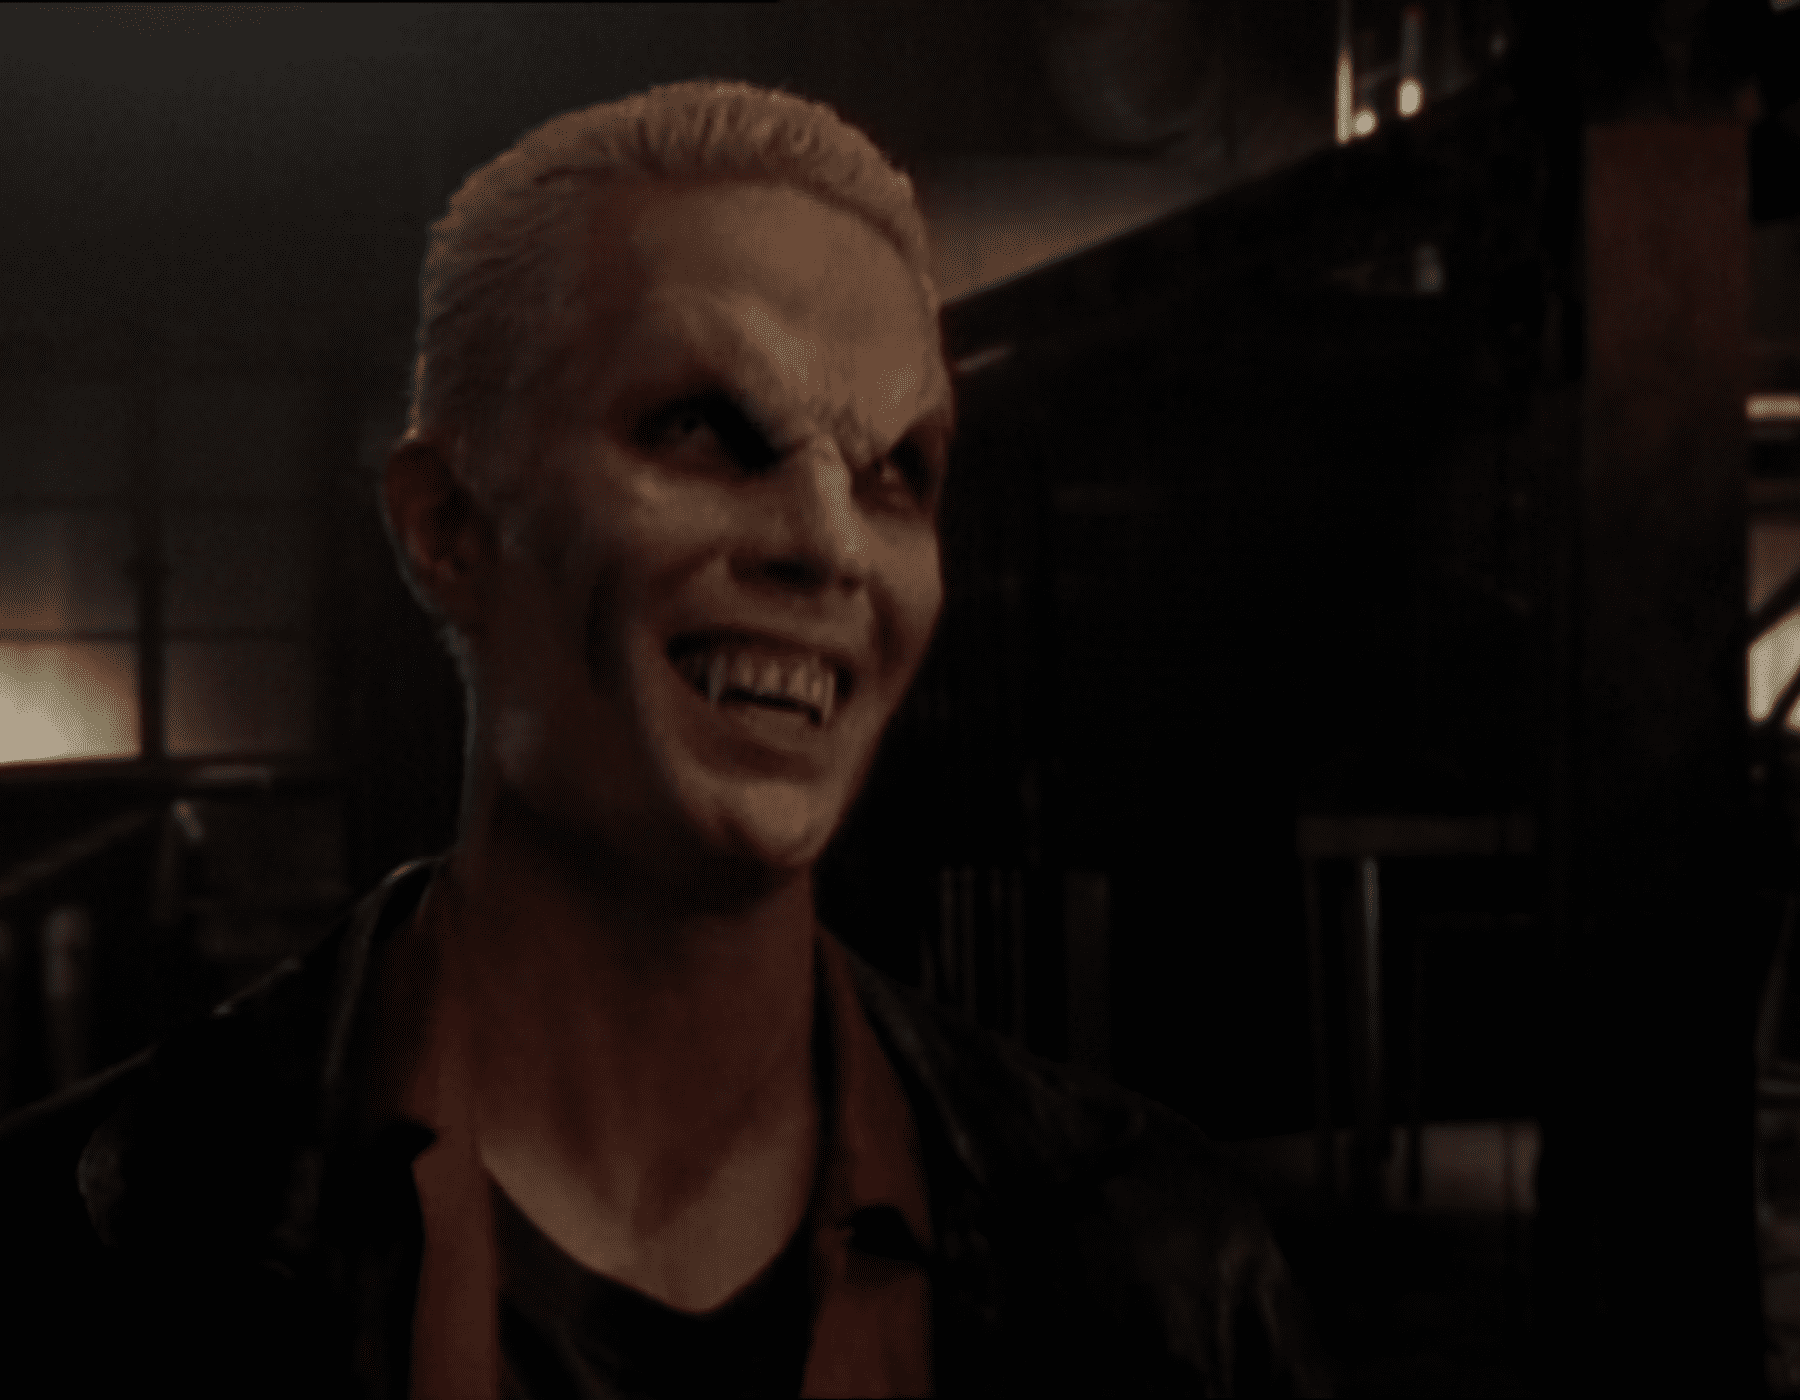 Spike laughs while vamped out